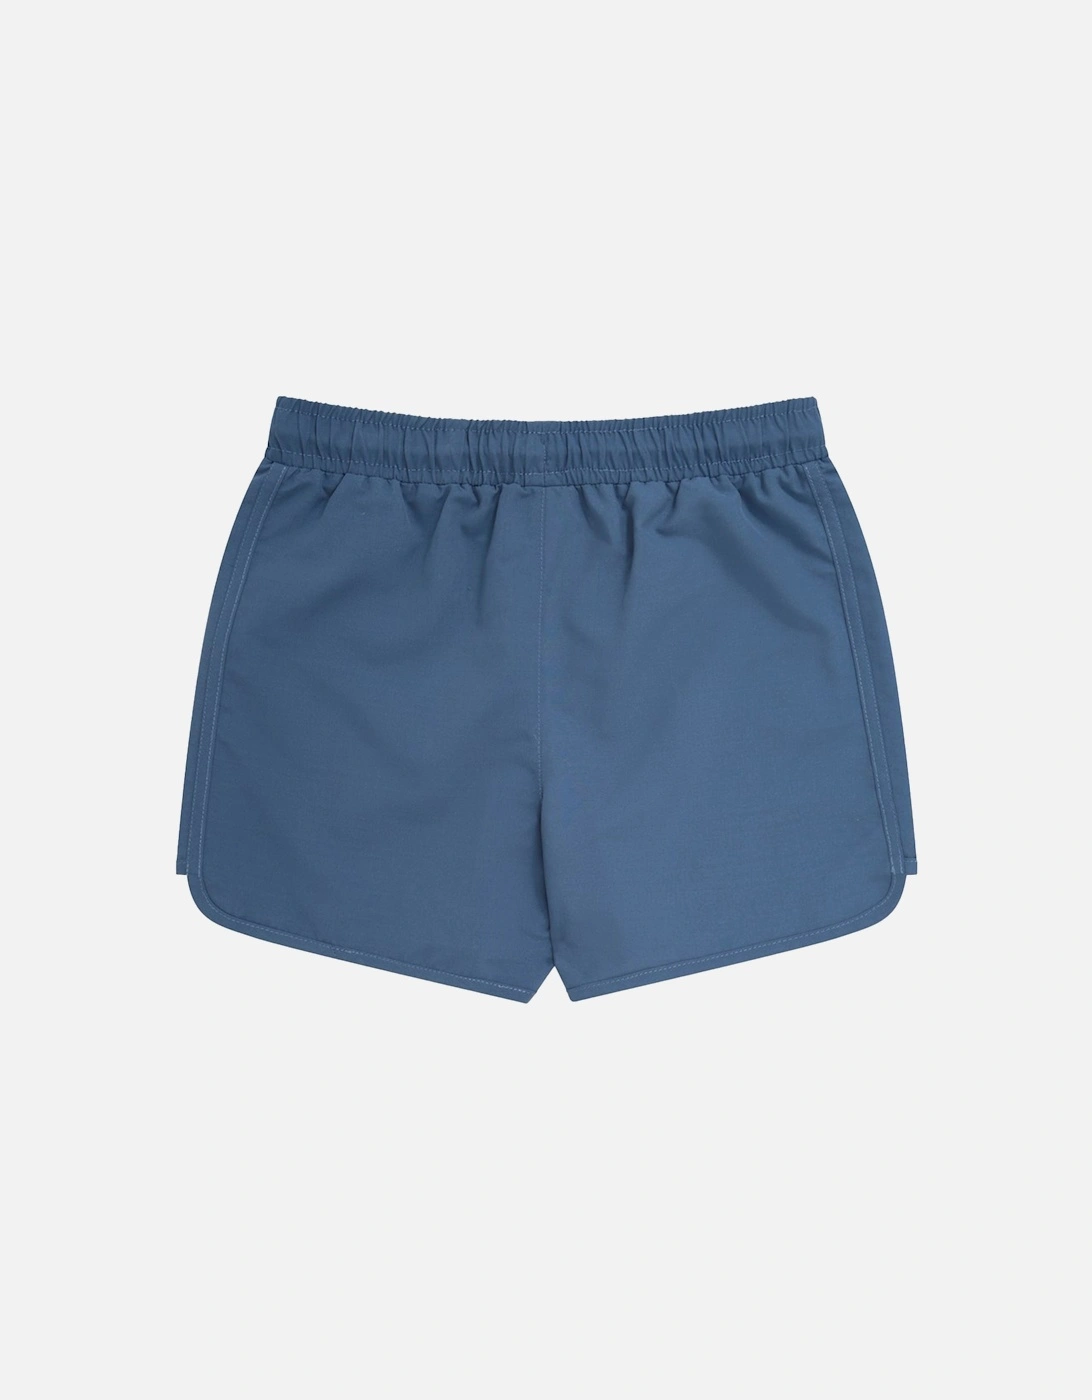 Childrens/Kids Holidaymaker Recycled Boardshorts